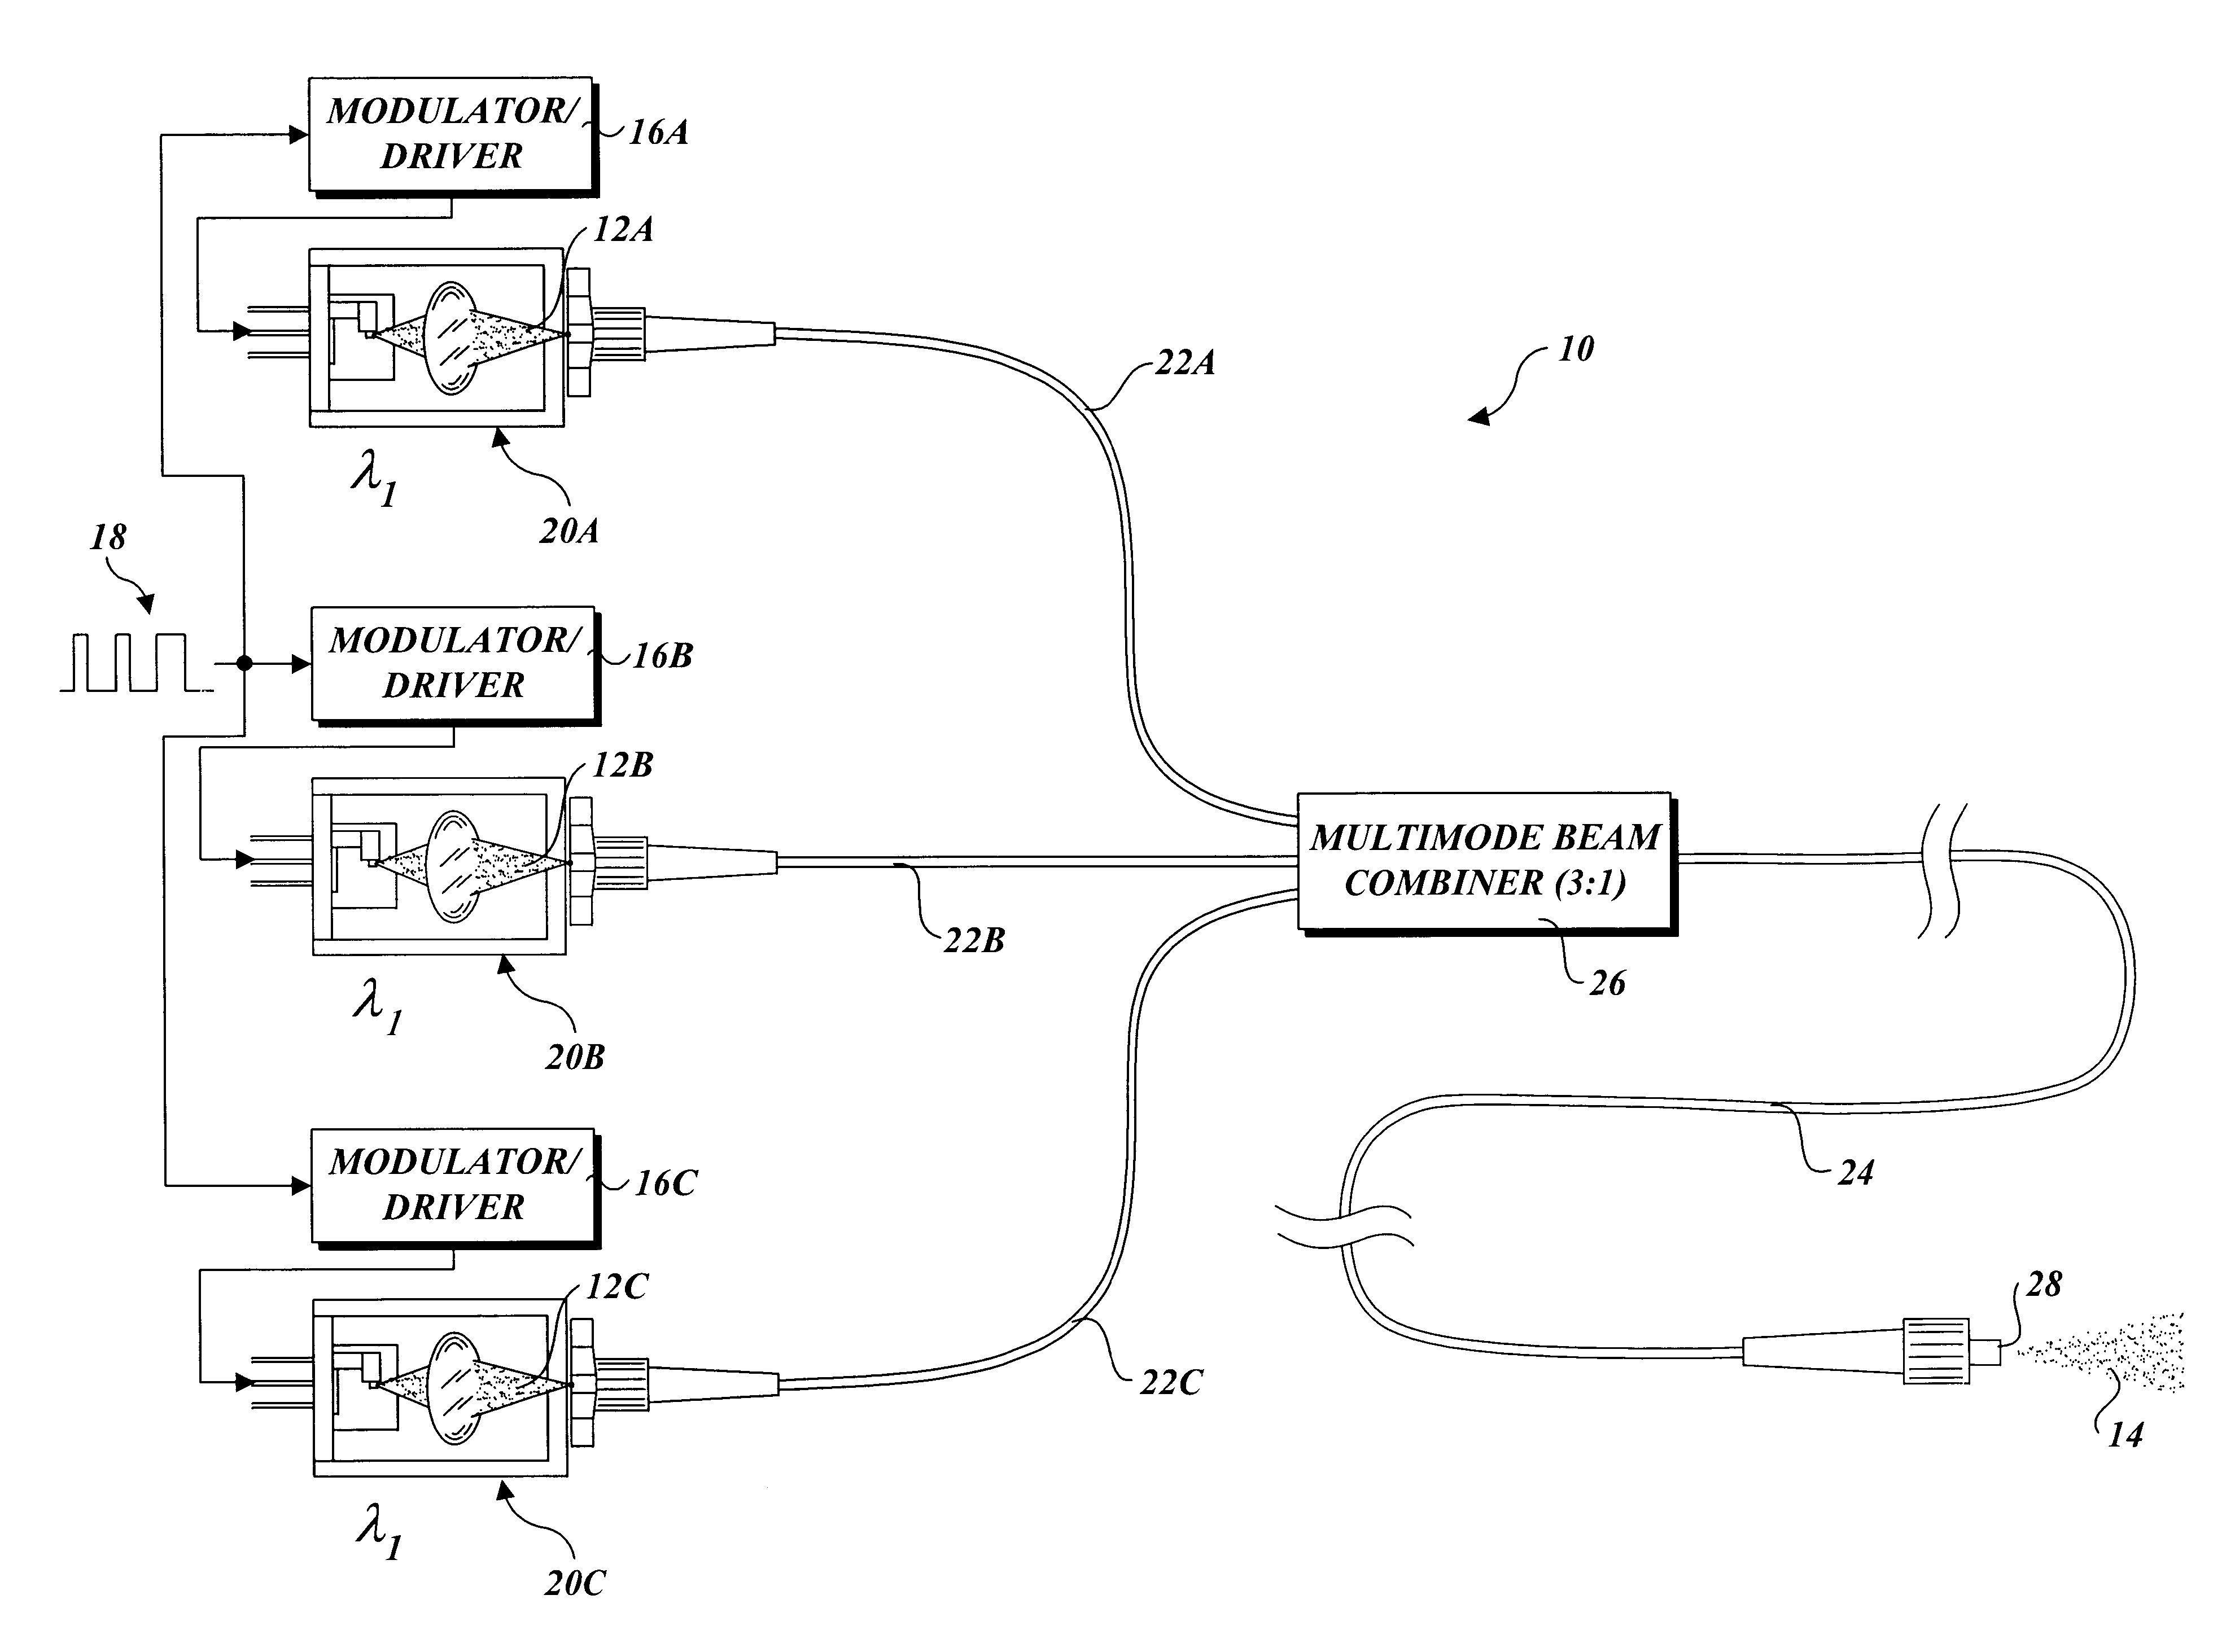 Apparatus and method for combining multiple optical beams in a free-space optical communications system